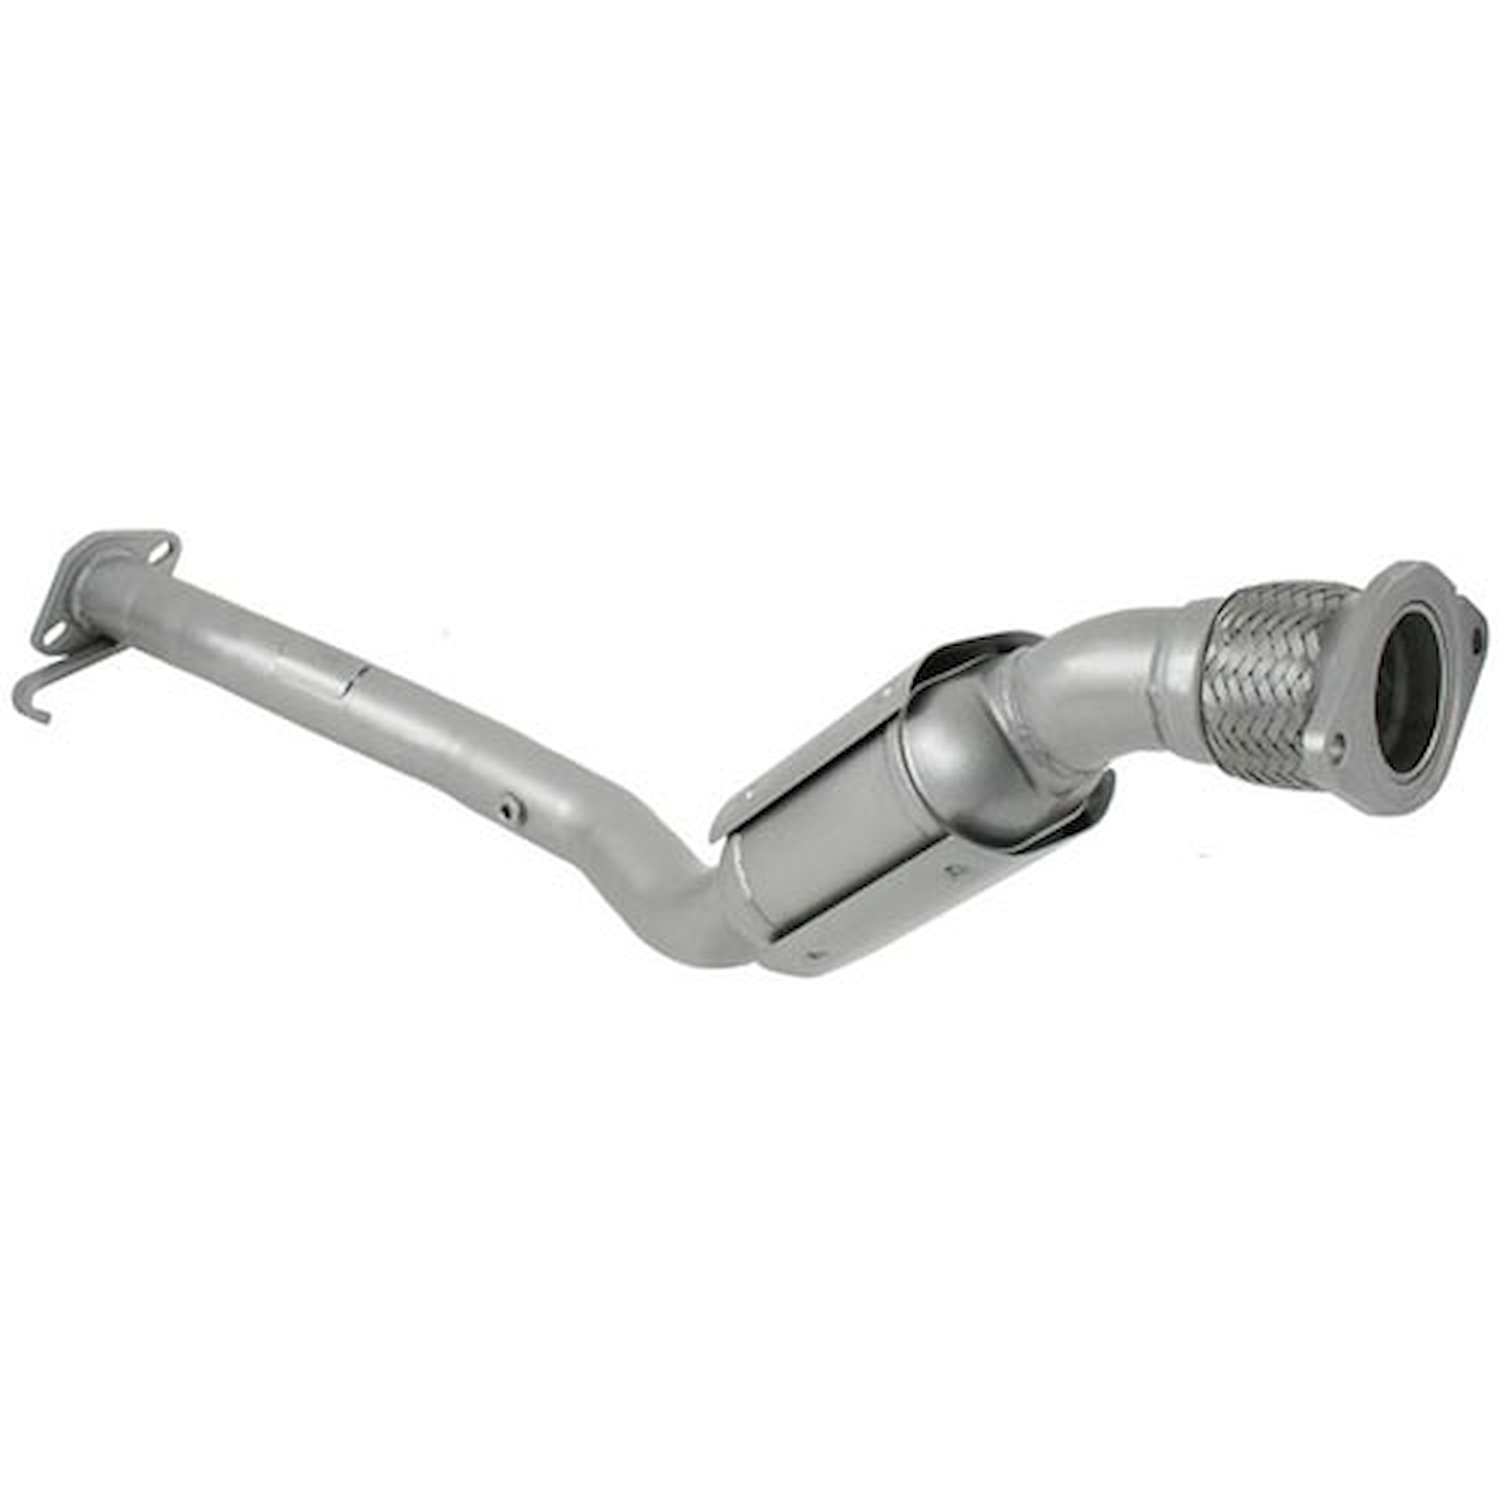 Pacesetter Direct-Fit Catalytic Converter. Direct Replacement of OEM, Low Restriction Design